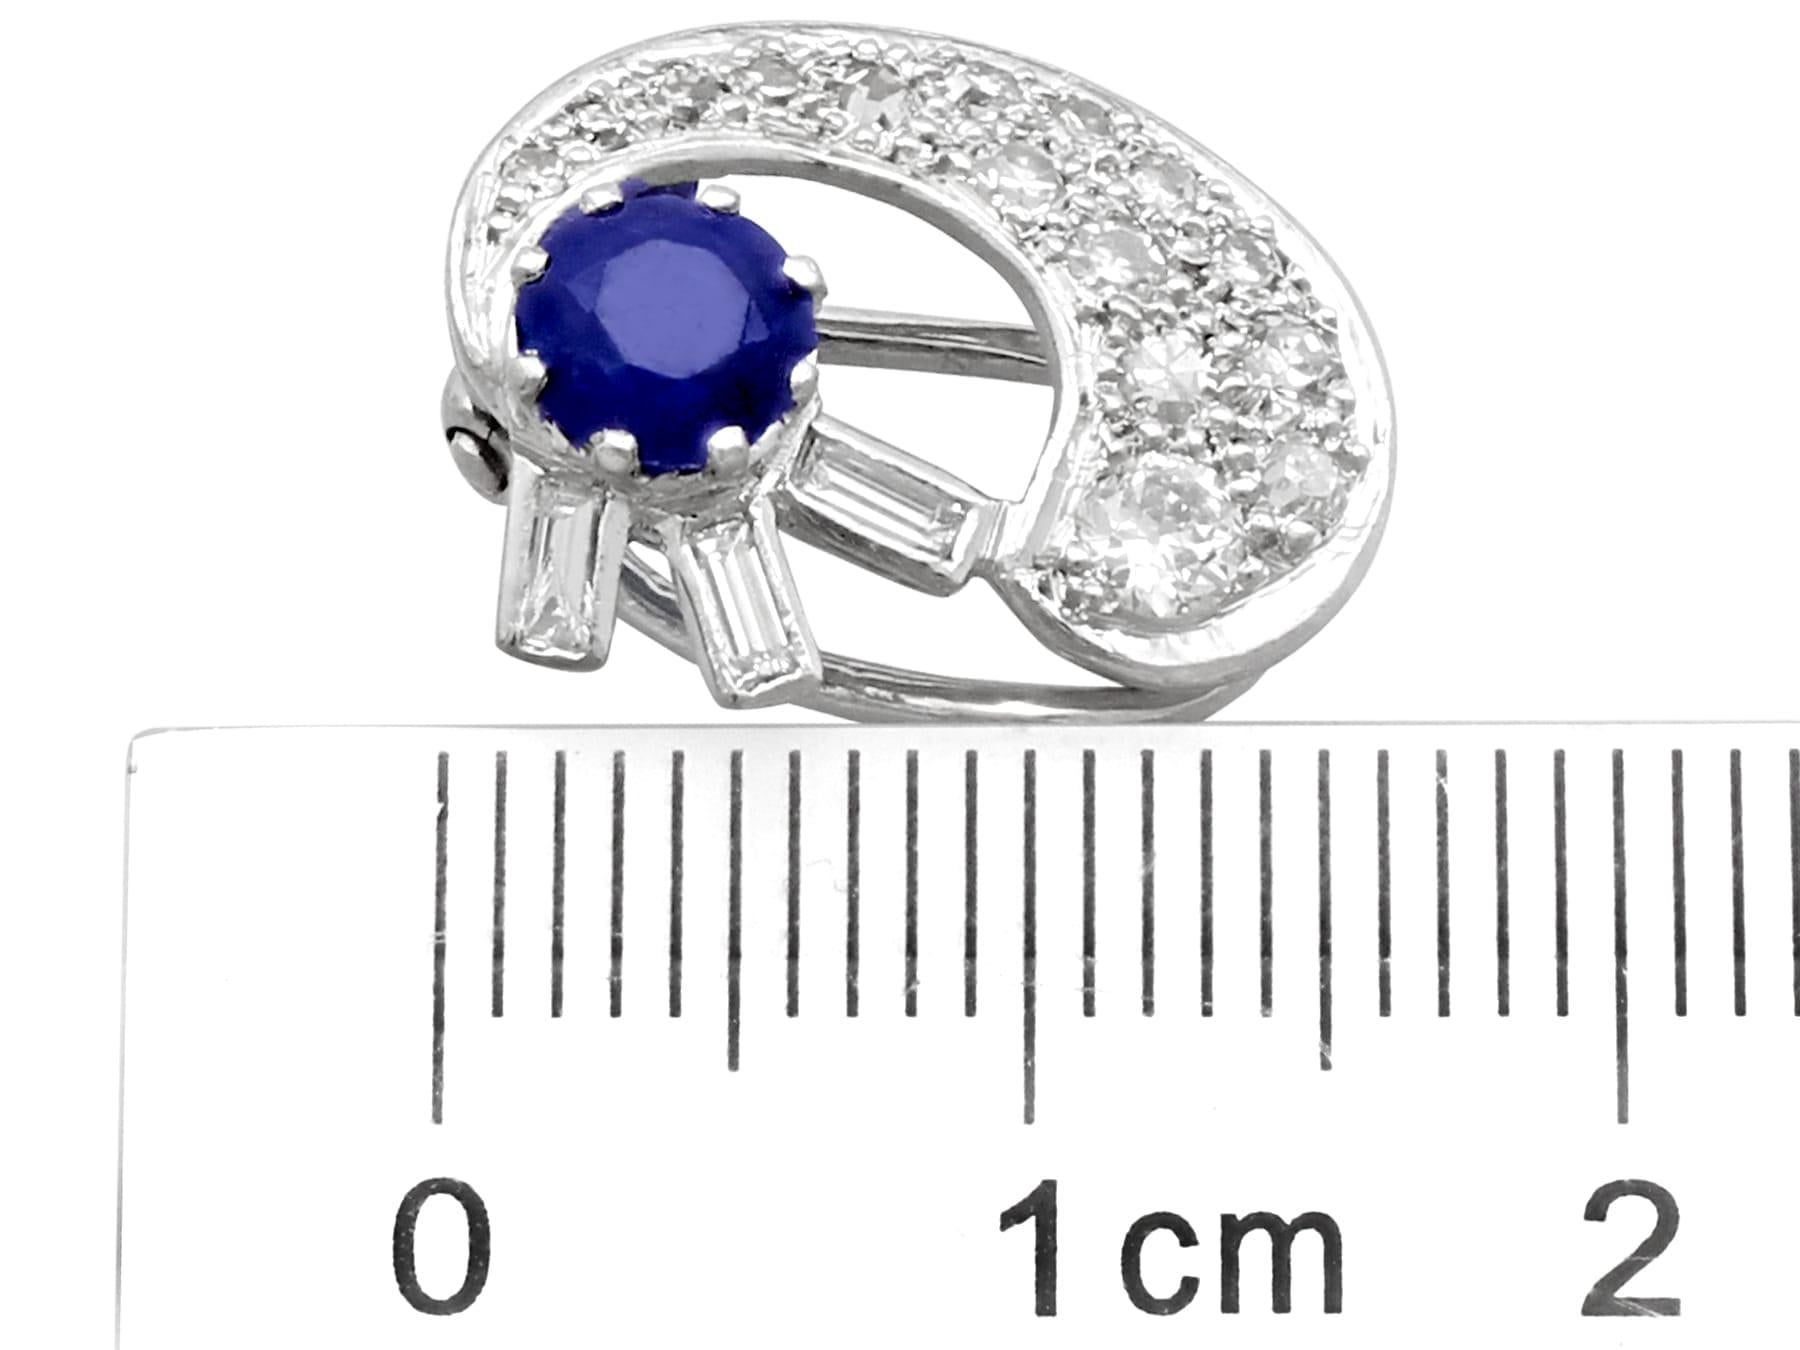 Antique 1.04 Carat Sapphire and 1.75 Carat Diamond White Gold Clip-on Earrings For Sale 2